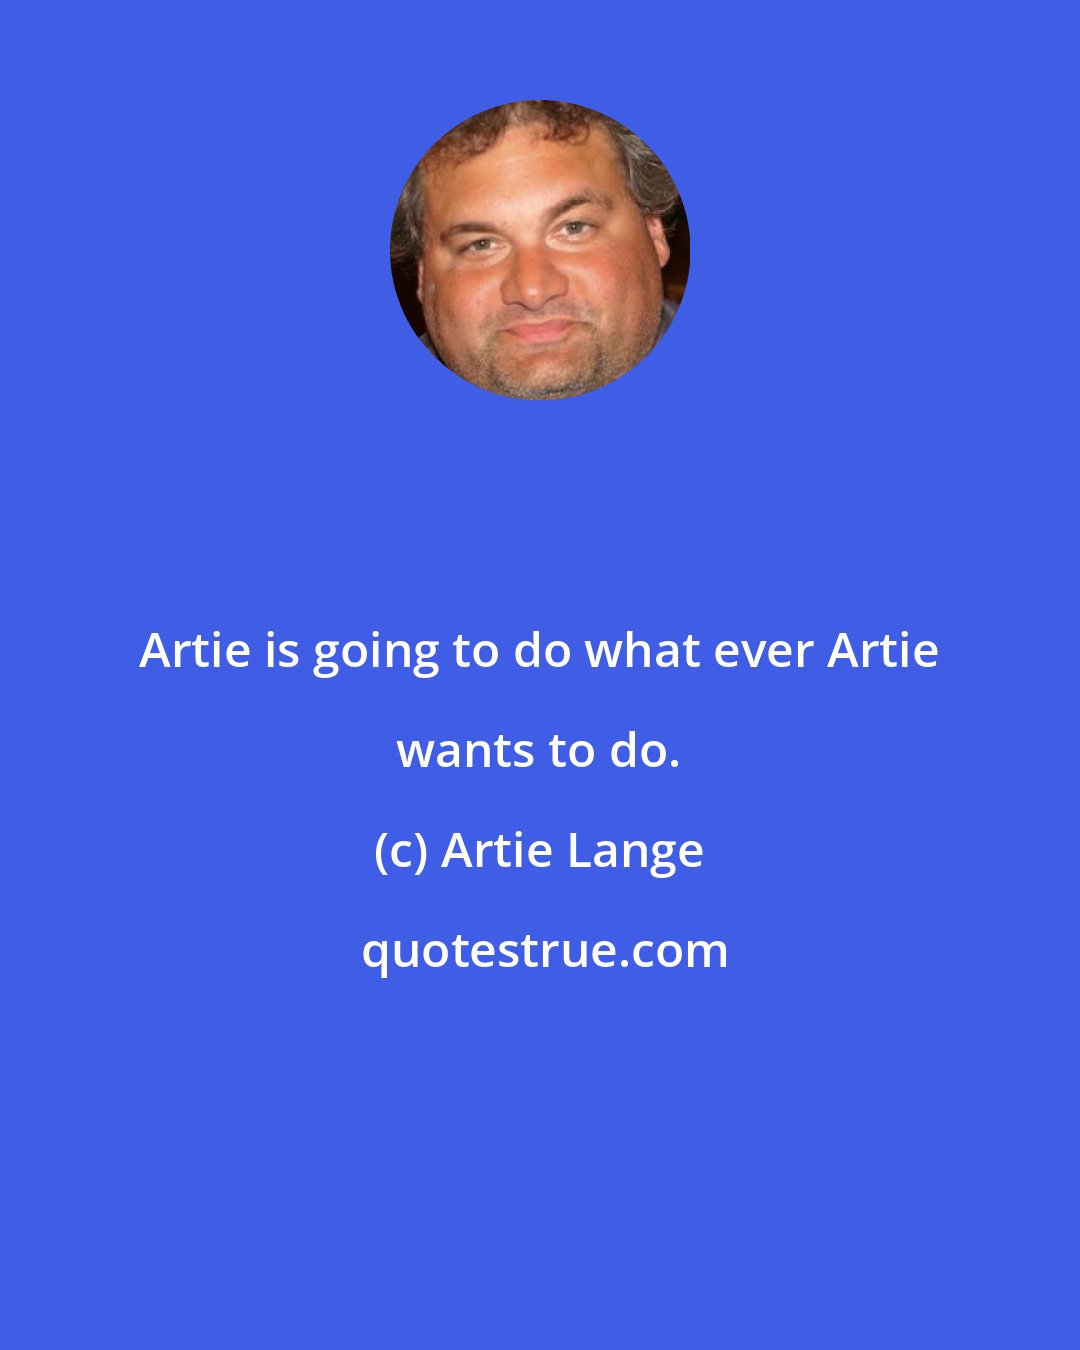 Artie Lange: Artie is going to do what ever Artie wants to do.